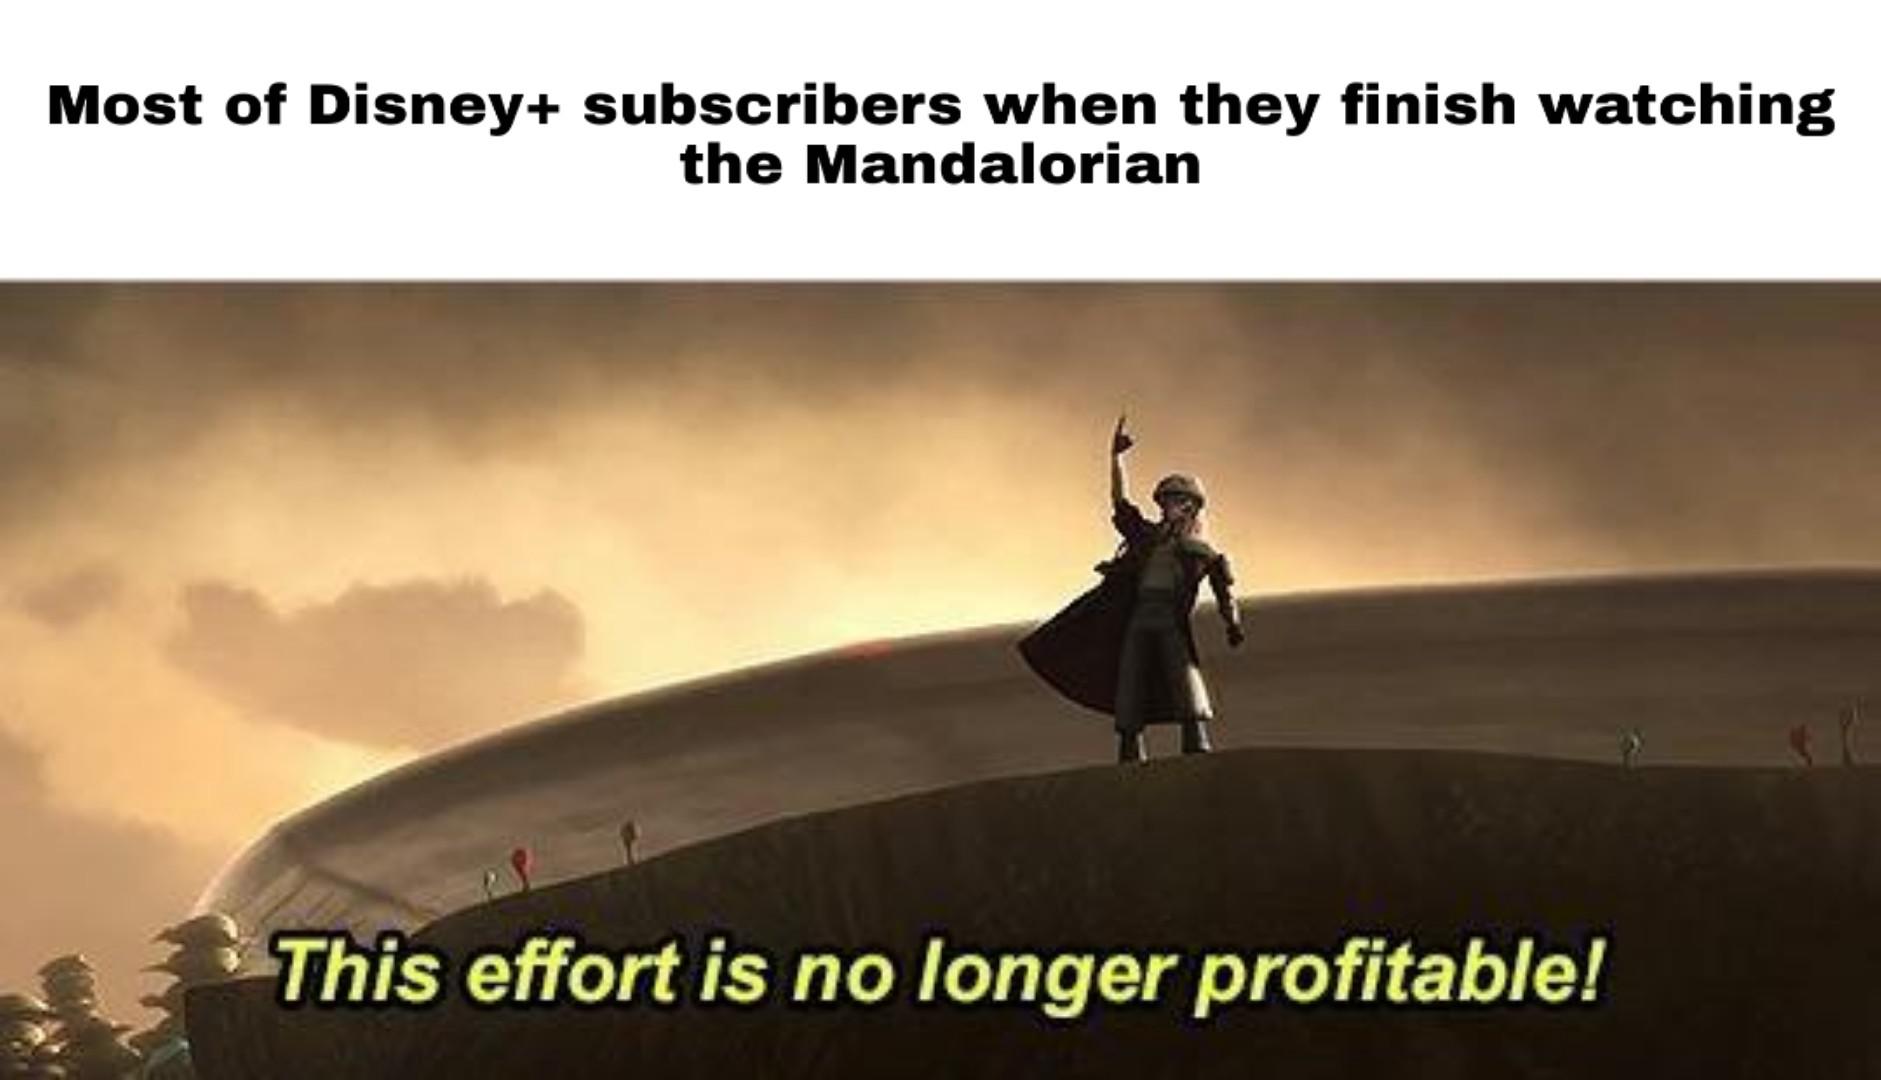 prequel-memes star-wars-memes prequel-memes text: Most of Disney+ subscribers when they finish watching the Mandalorian %This effort is no longer profitable! 